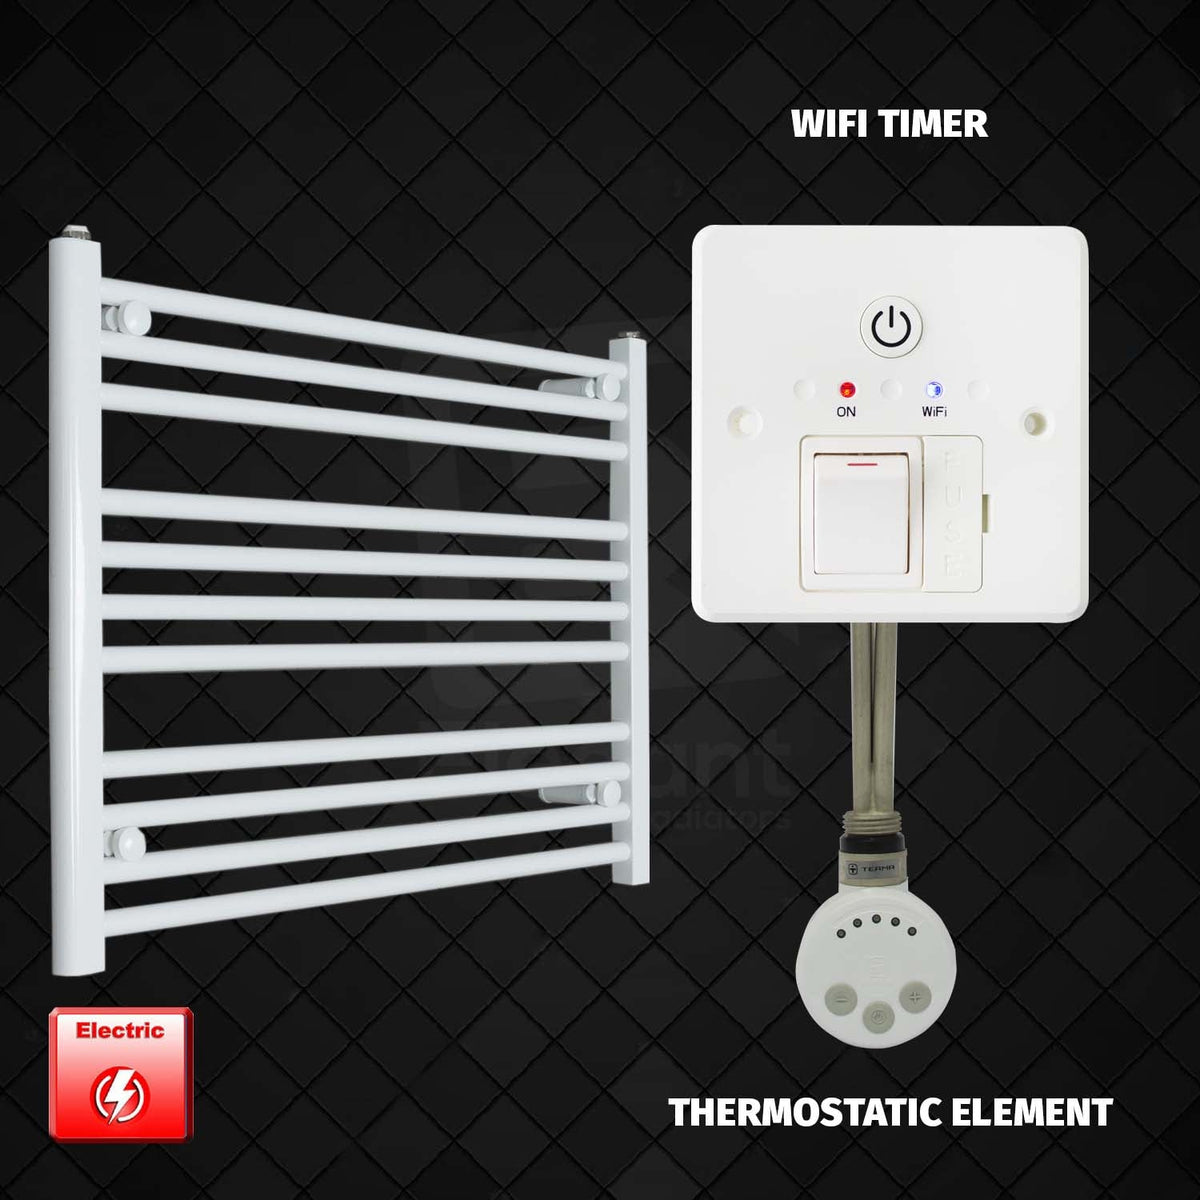 600 x 800 Pre-Filled Electric Heated Towel Radiator White HTR MOA Thermostatic element Wifi timer